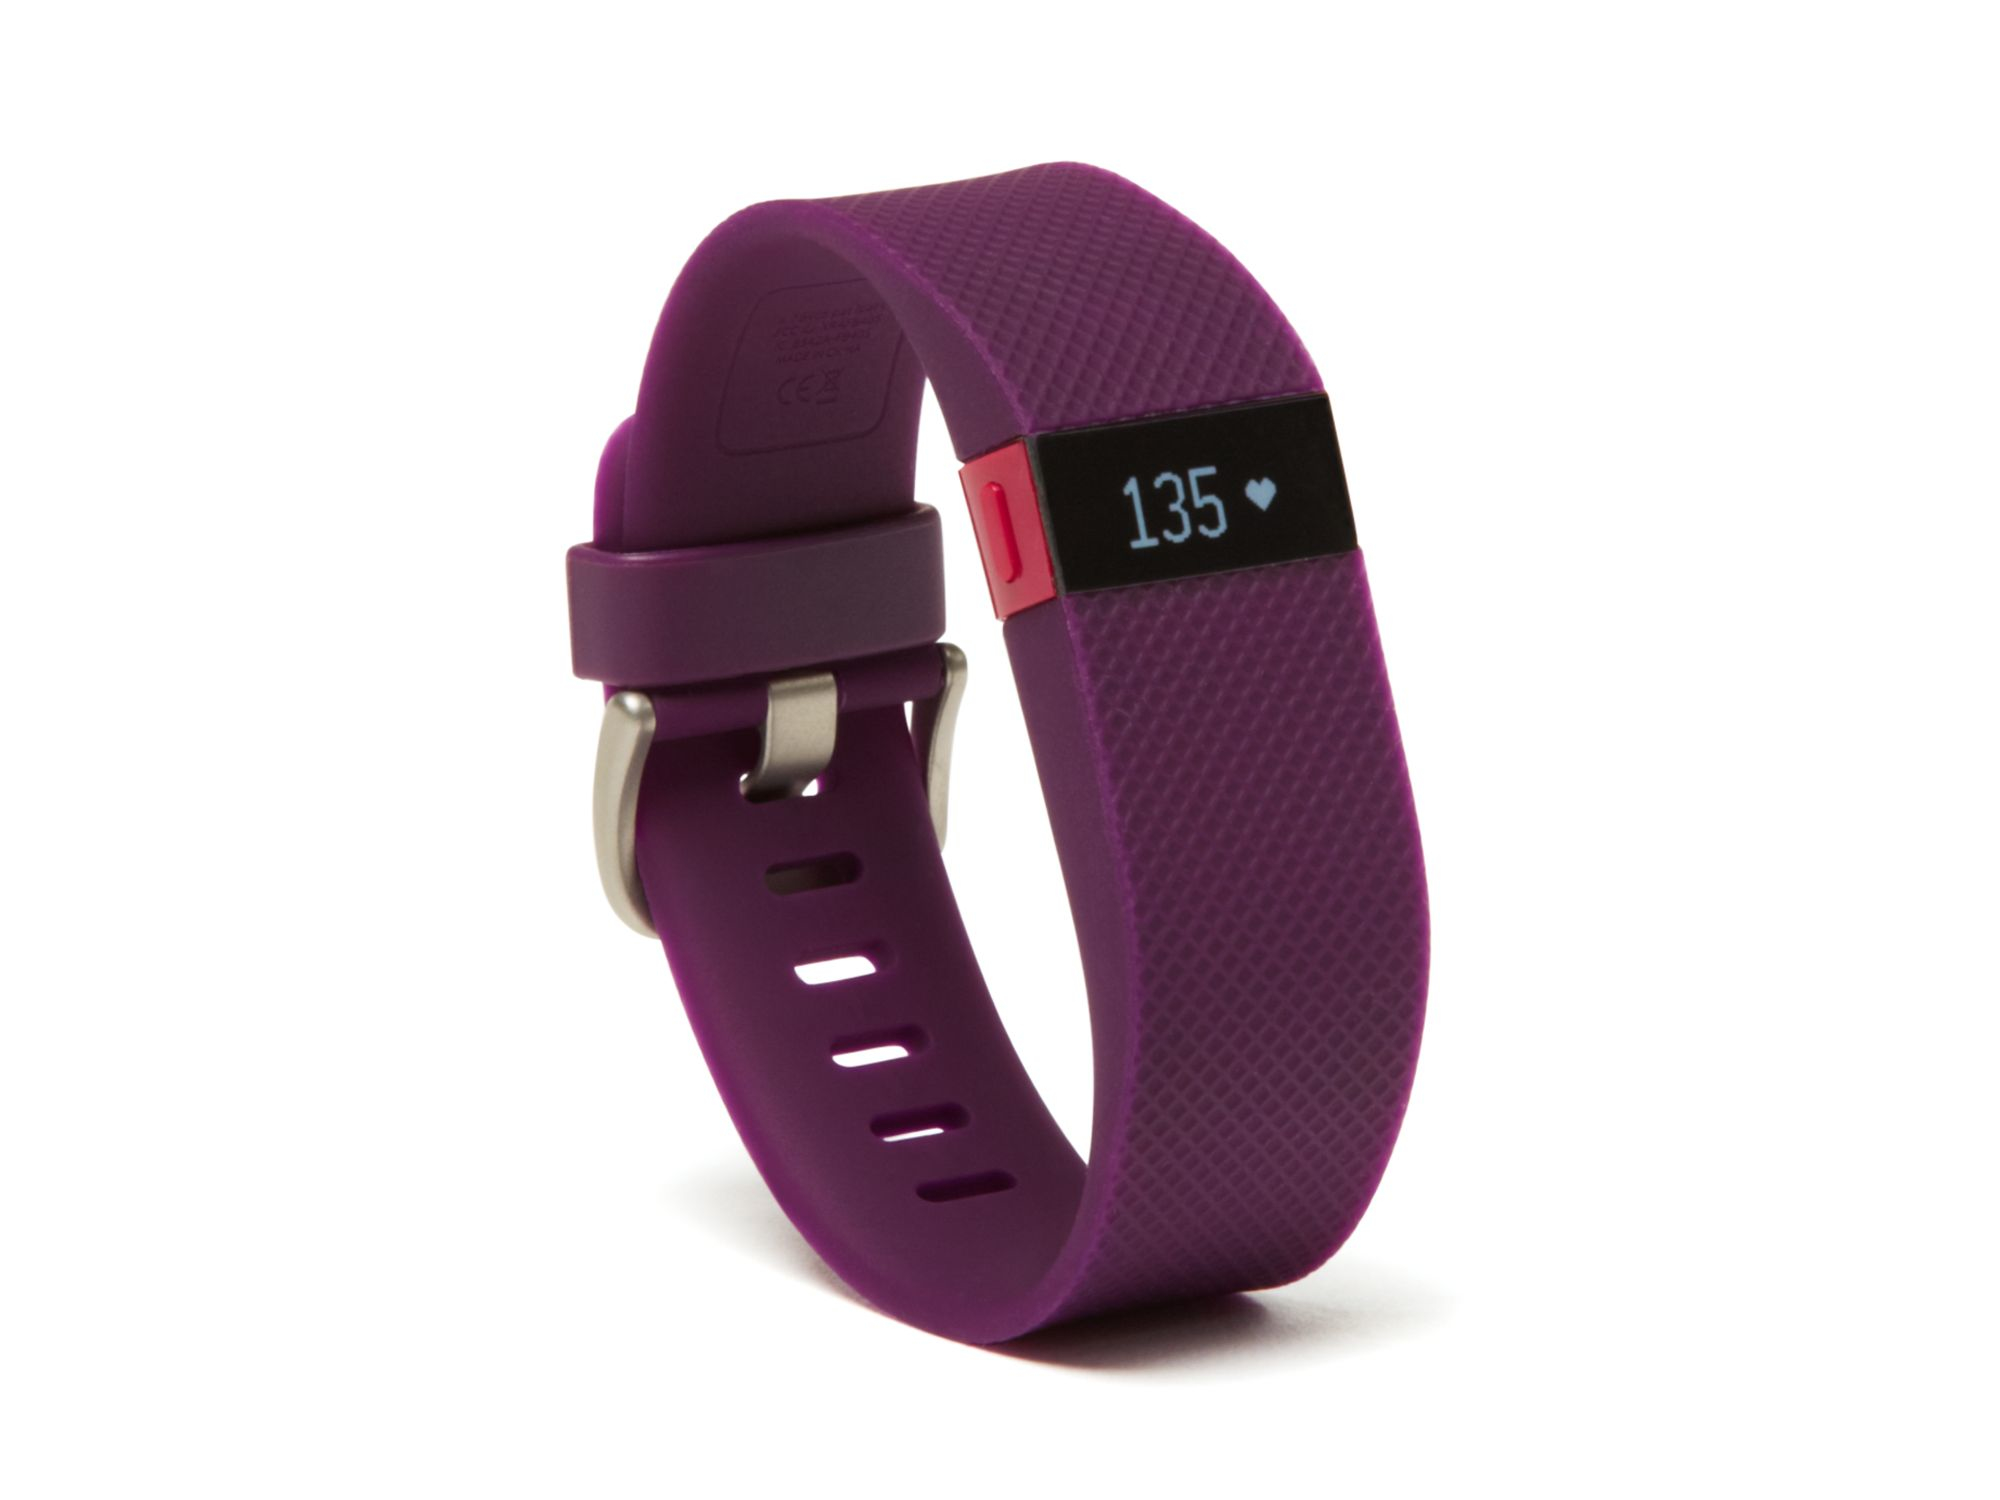 Lyst - Fitbit Charge Hr Wireless Activity Tracker in Purple for Men